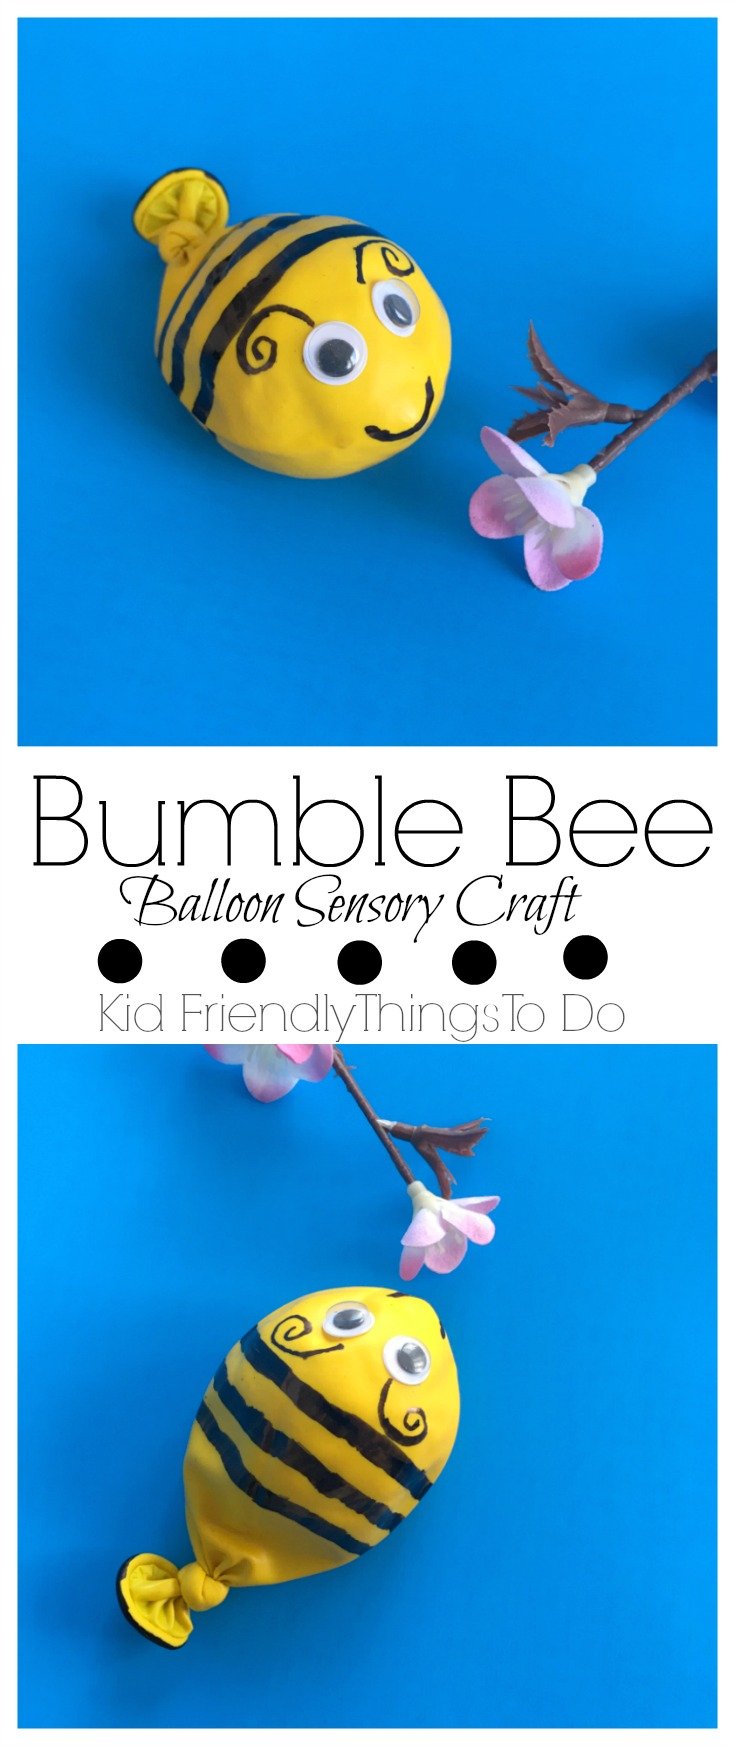 A Bumble Bee Balloon Fidget Sensory Craft For Kids - This is so much fun and the easiest craft to make! KidFriendlyThingsToDo.com